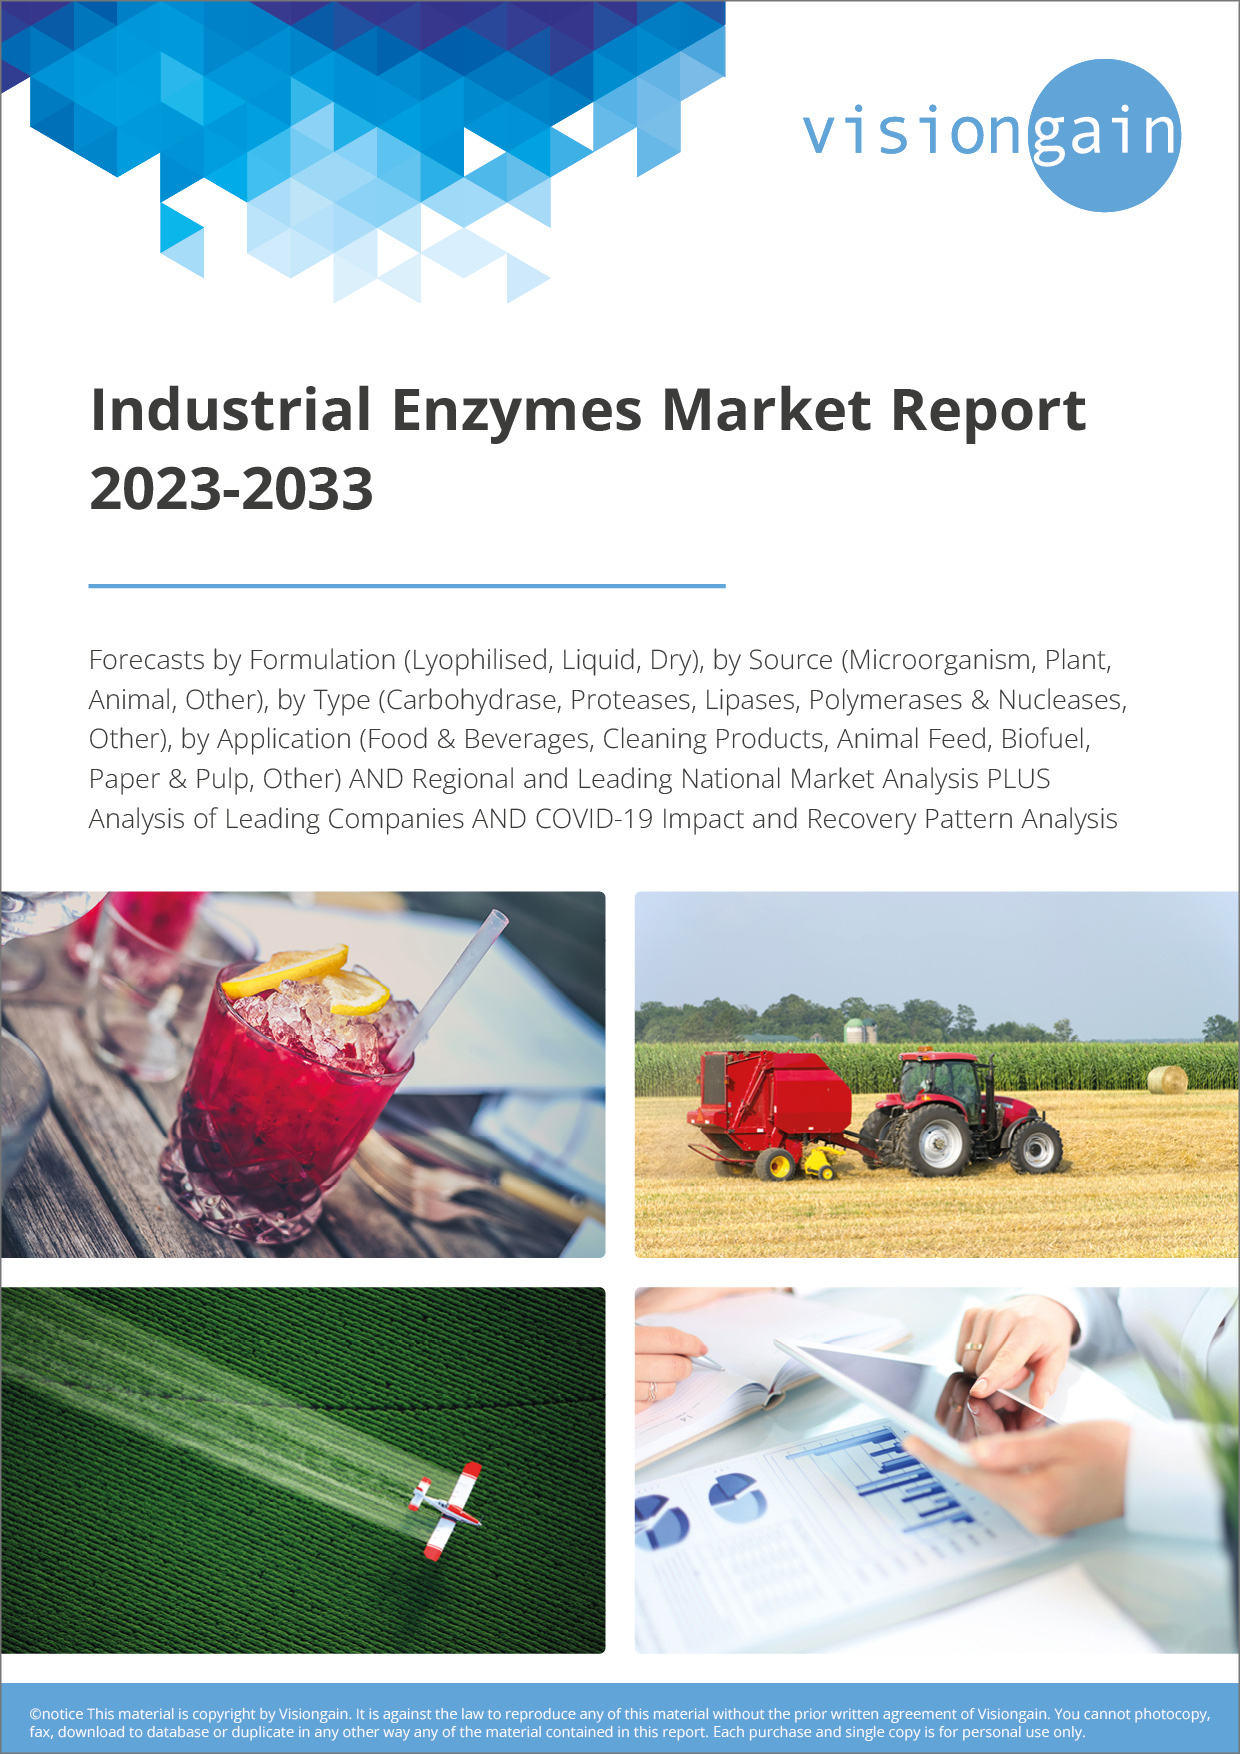 Industrial Enzymes Market Report 2023-2033